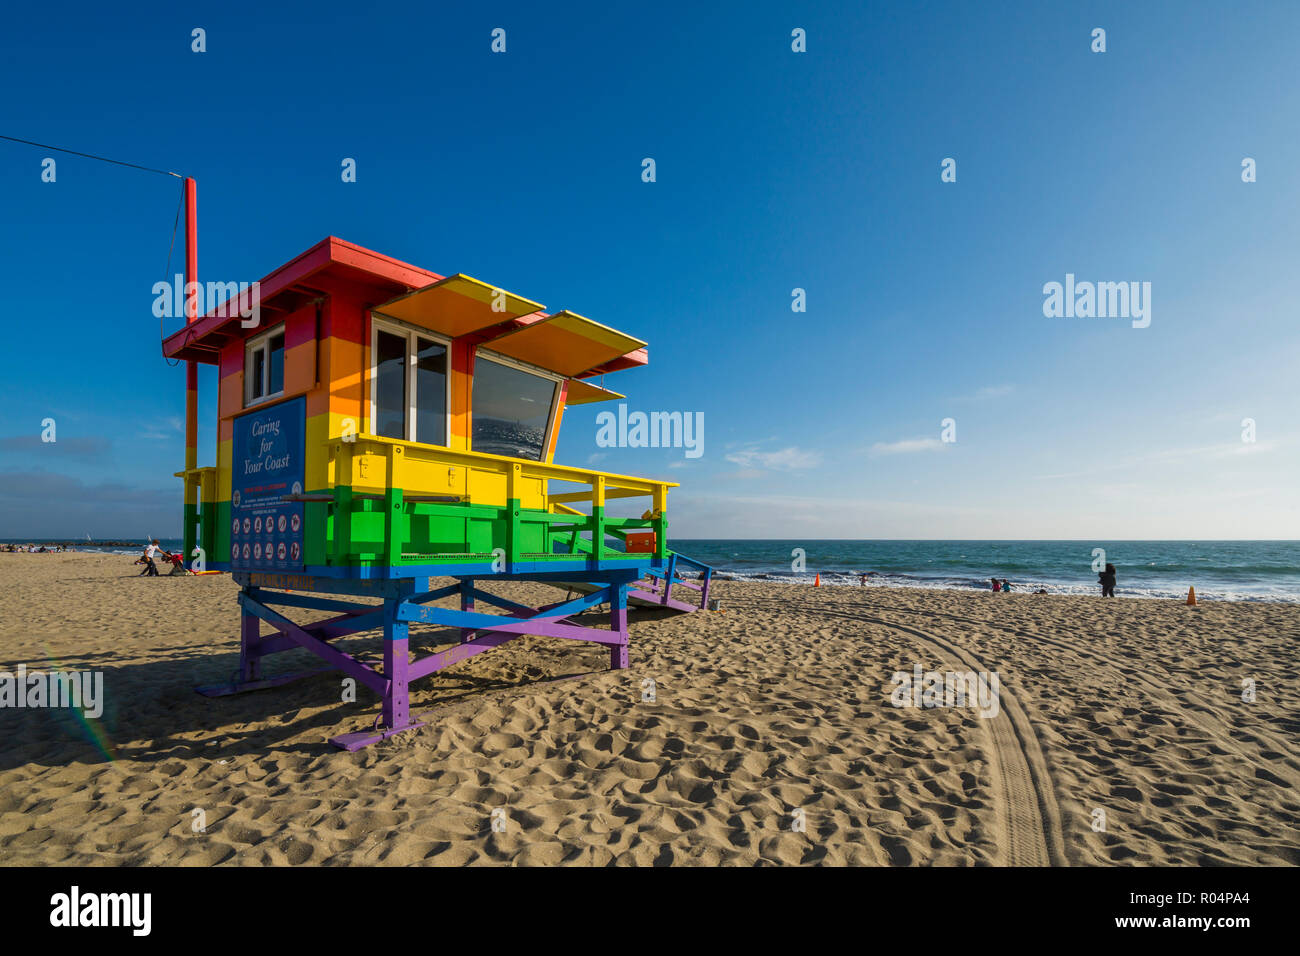 View of Lifeguard Watchtower on Venice Beach, Los Angeles, California, United States of America, North America Stock Photo